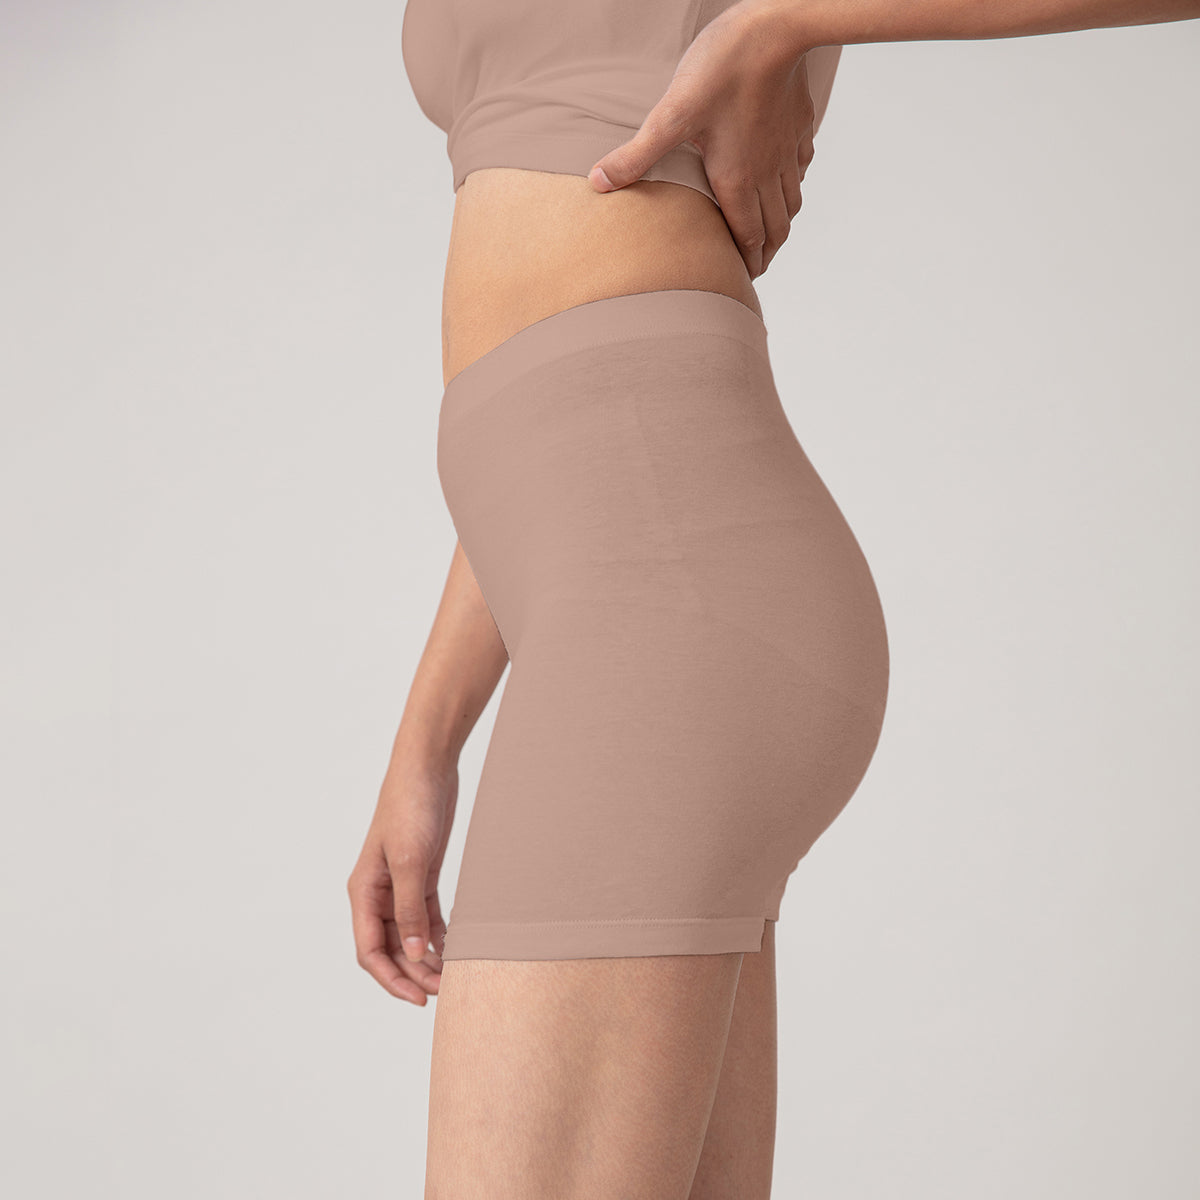 Nykd by Nykaa Stretch cotton cycling shorts - Nude NYP083